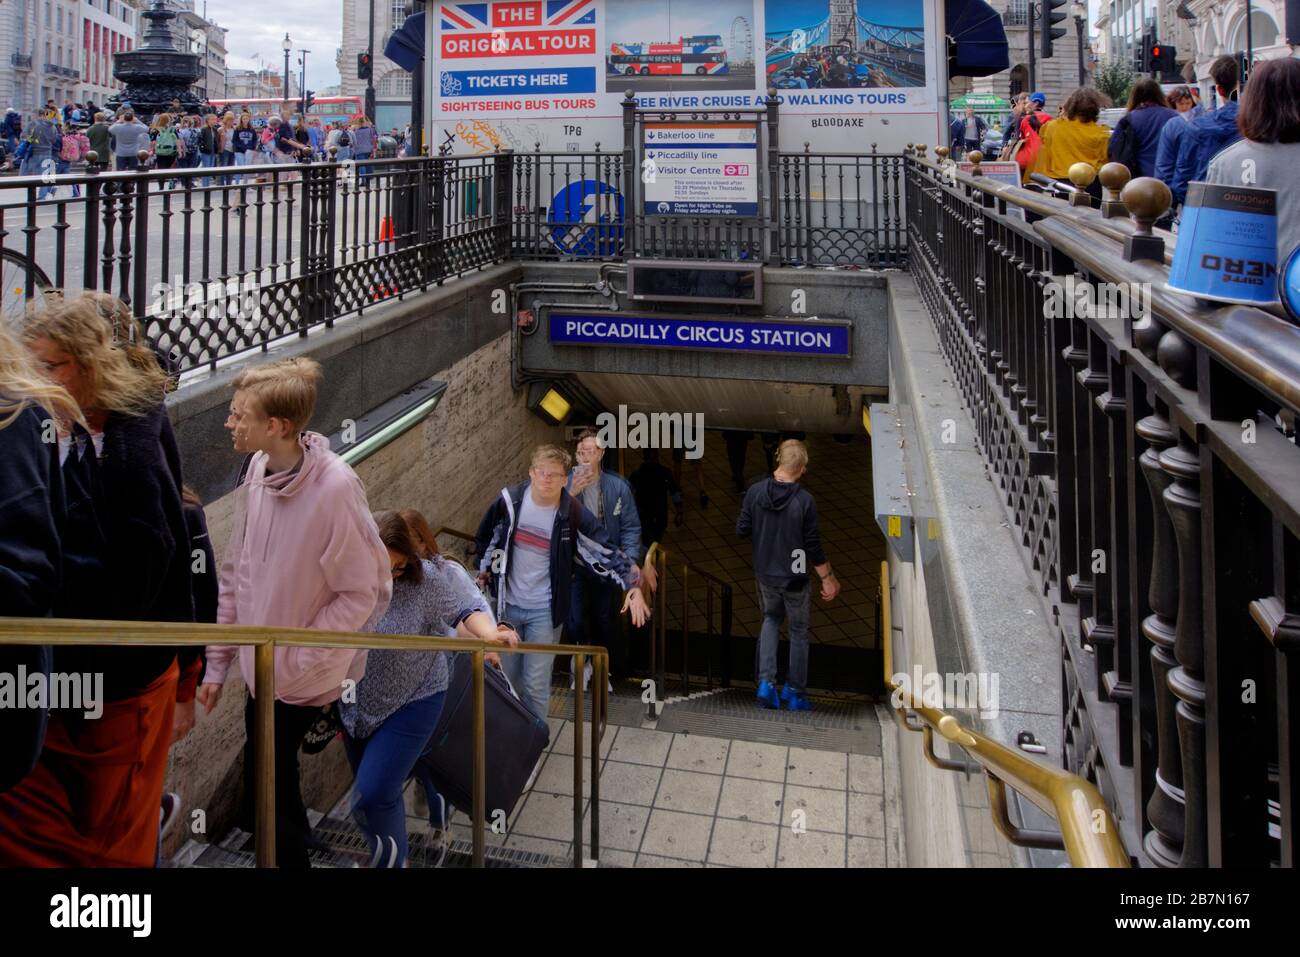 London, United Kingdom - September 7, 2019: Subway entrance to Piccadilly Circus tube station with numerous tourists walking up and down steps. Stock Photo